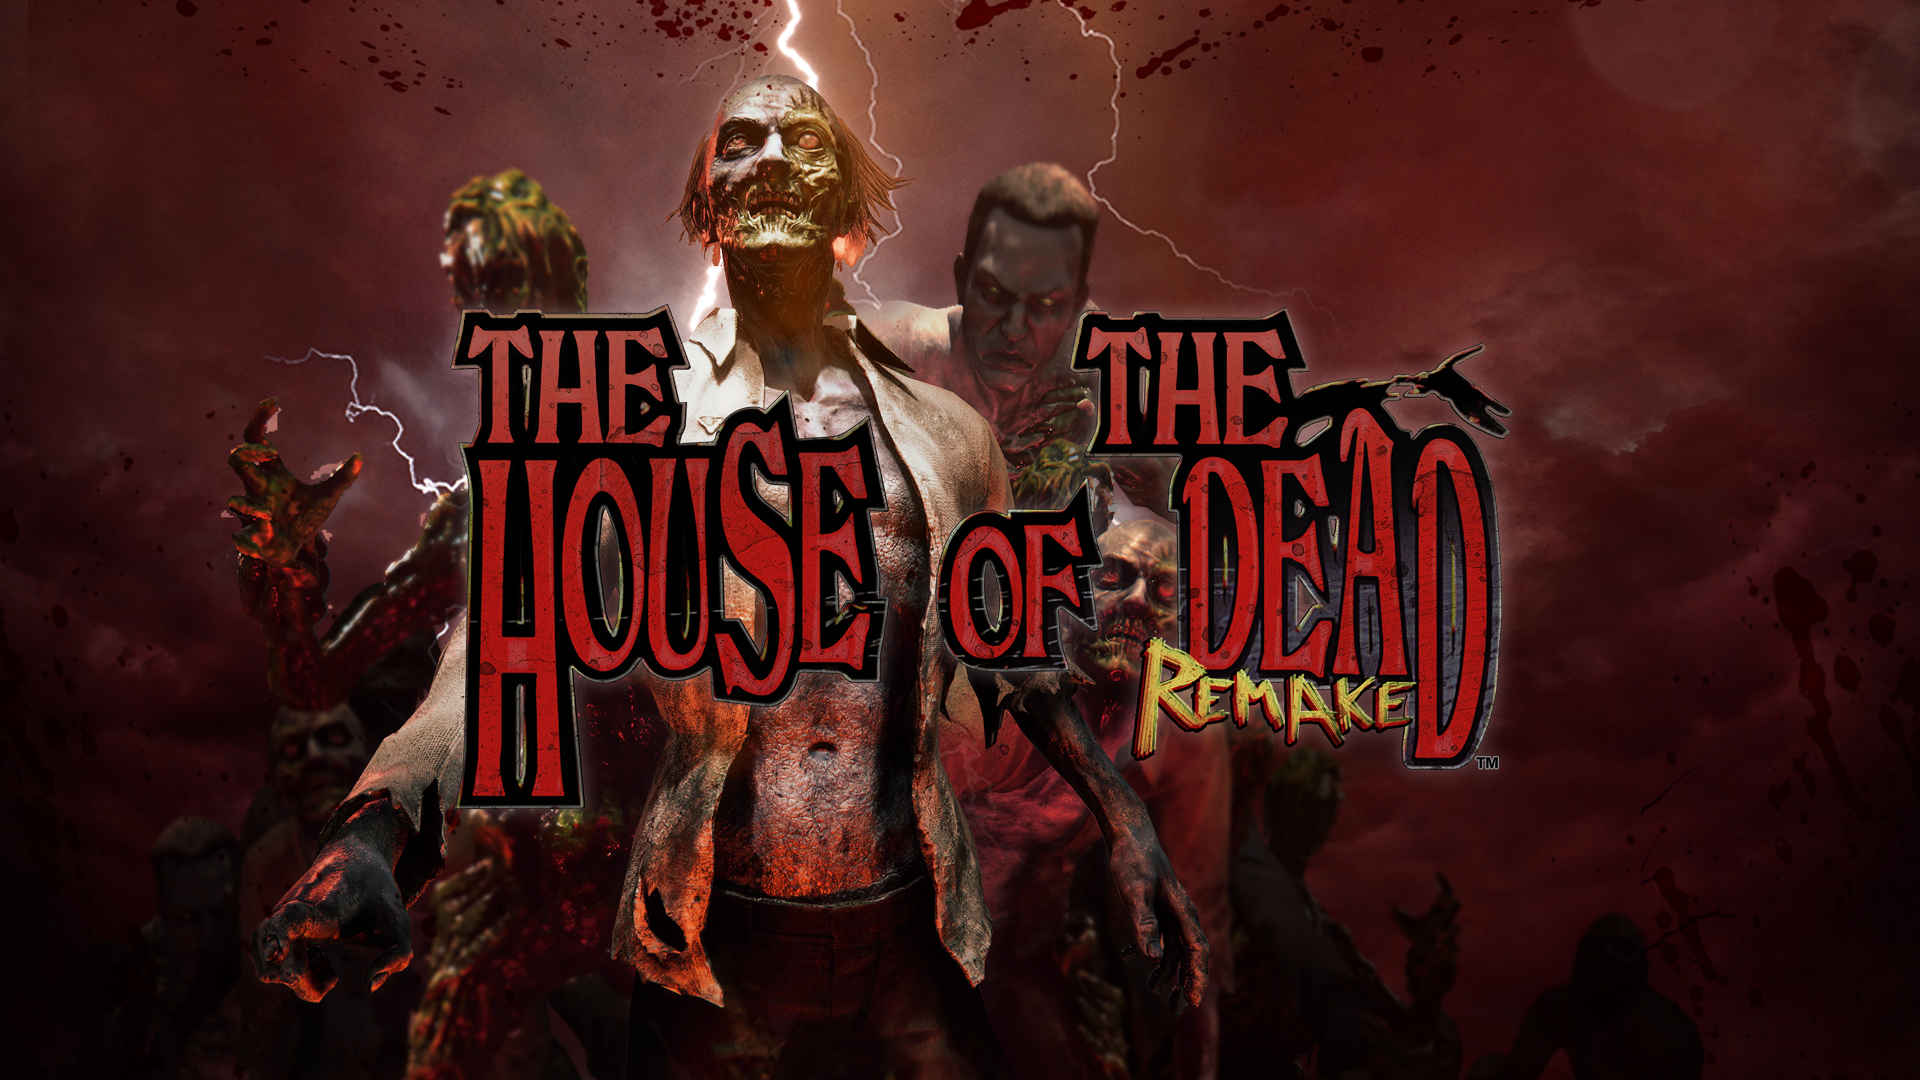 The House of the Dead: Remake The House of the Dead Remake 